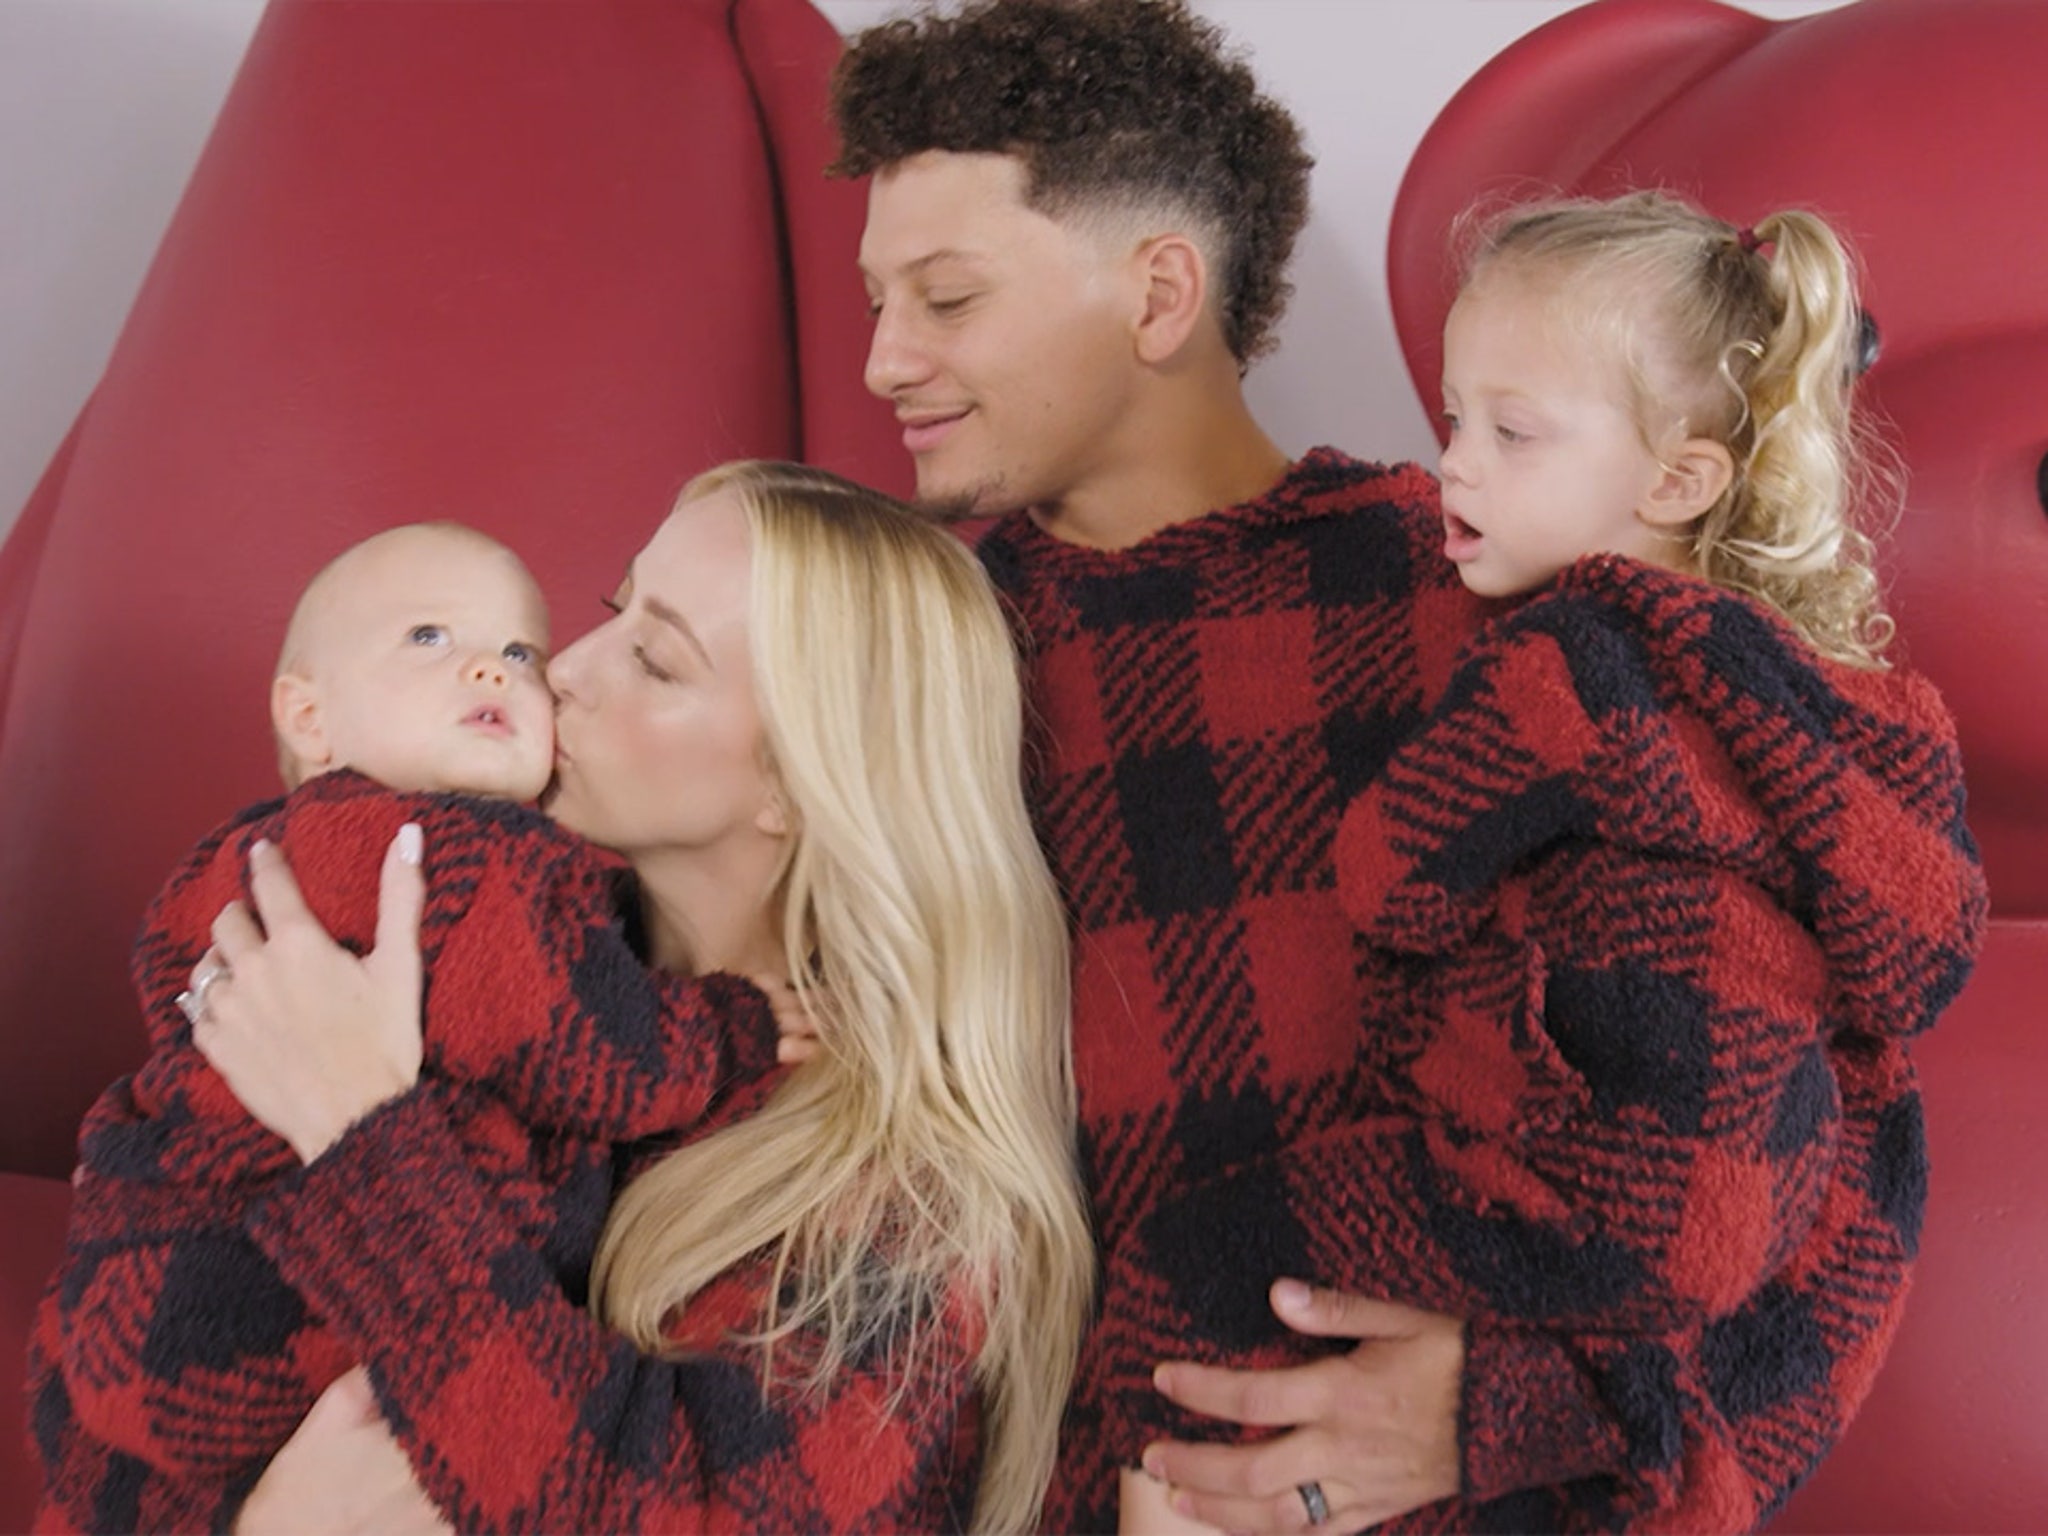 Patrick and Brittany Mahomes Star in New Skims Campaign